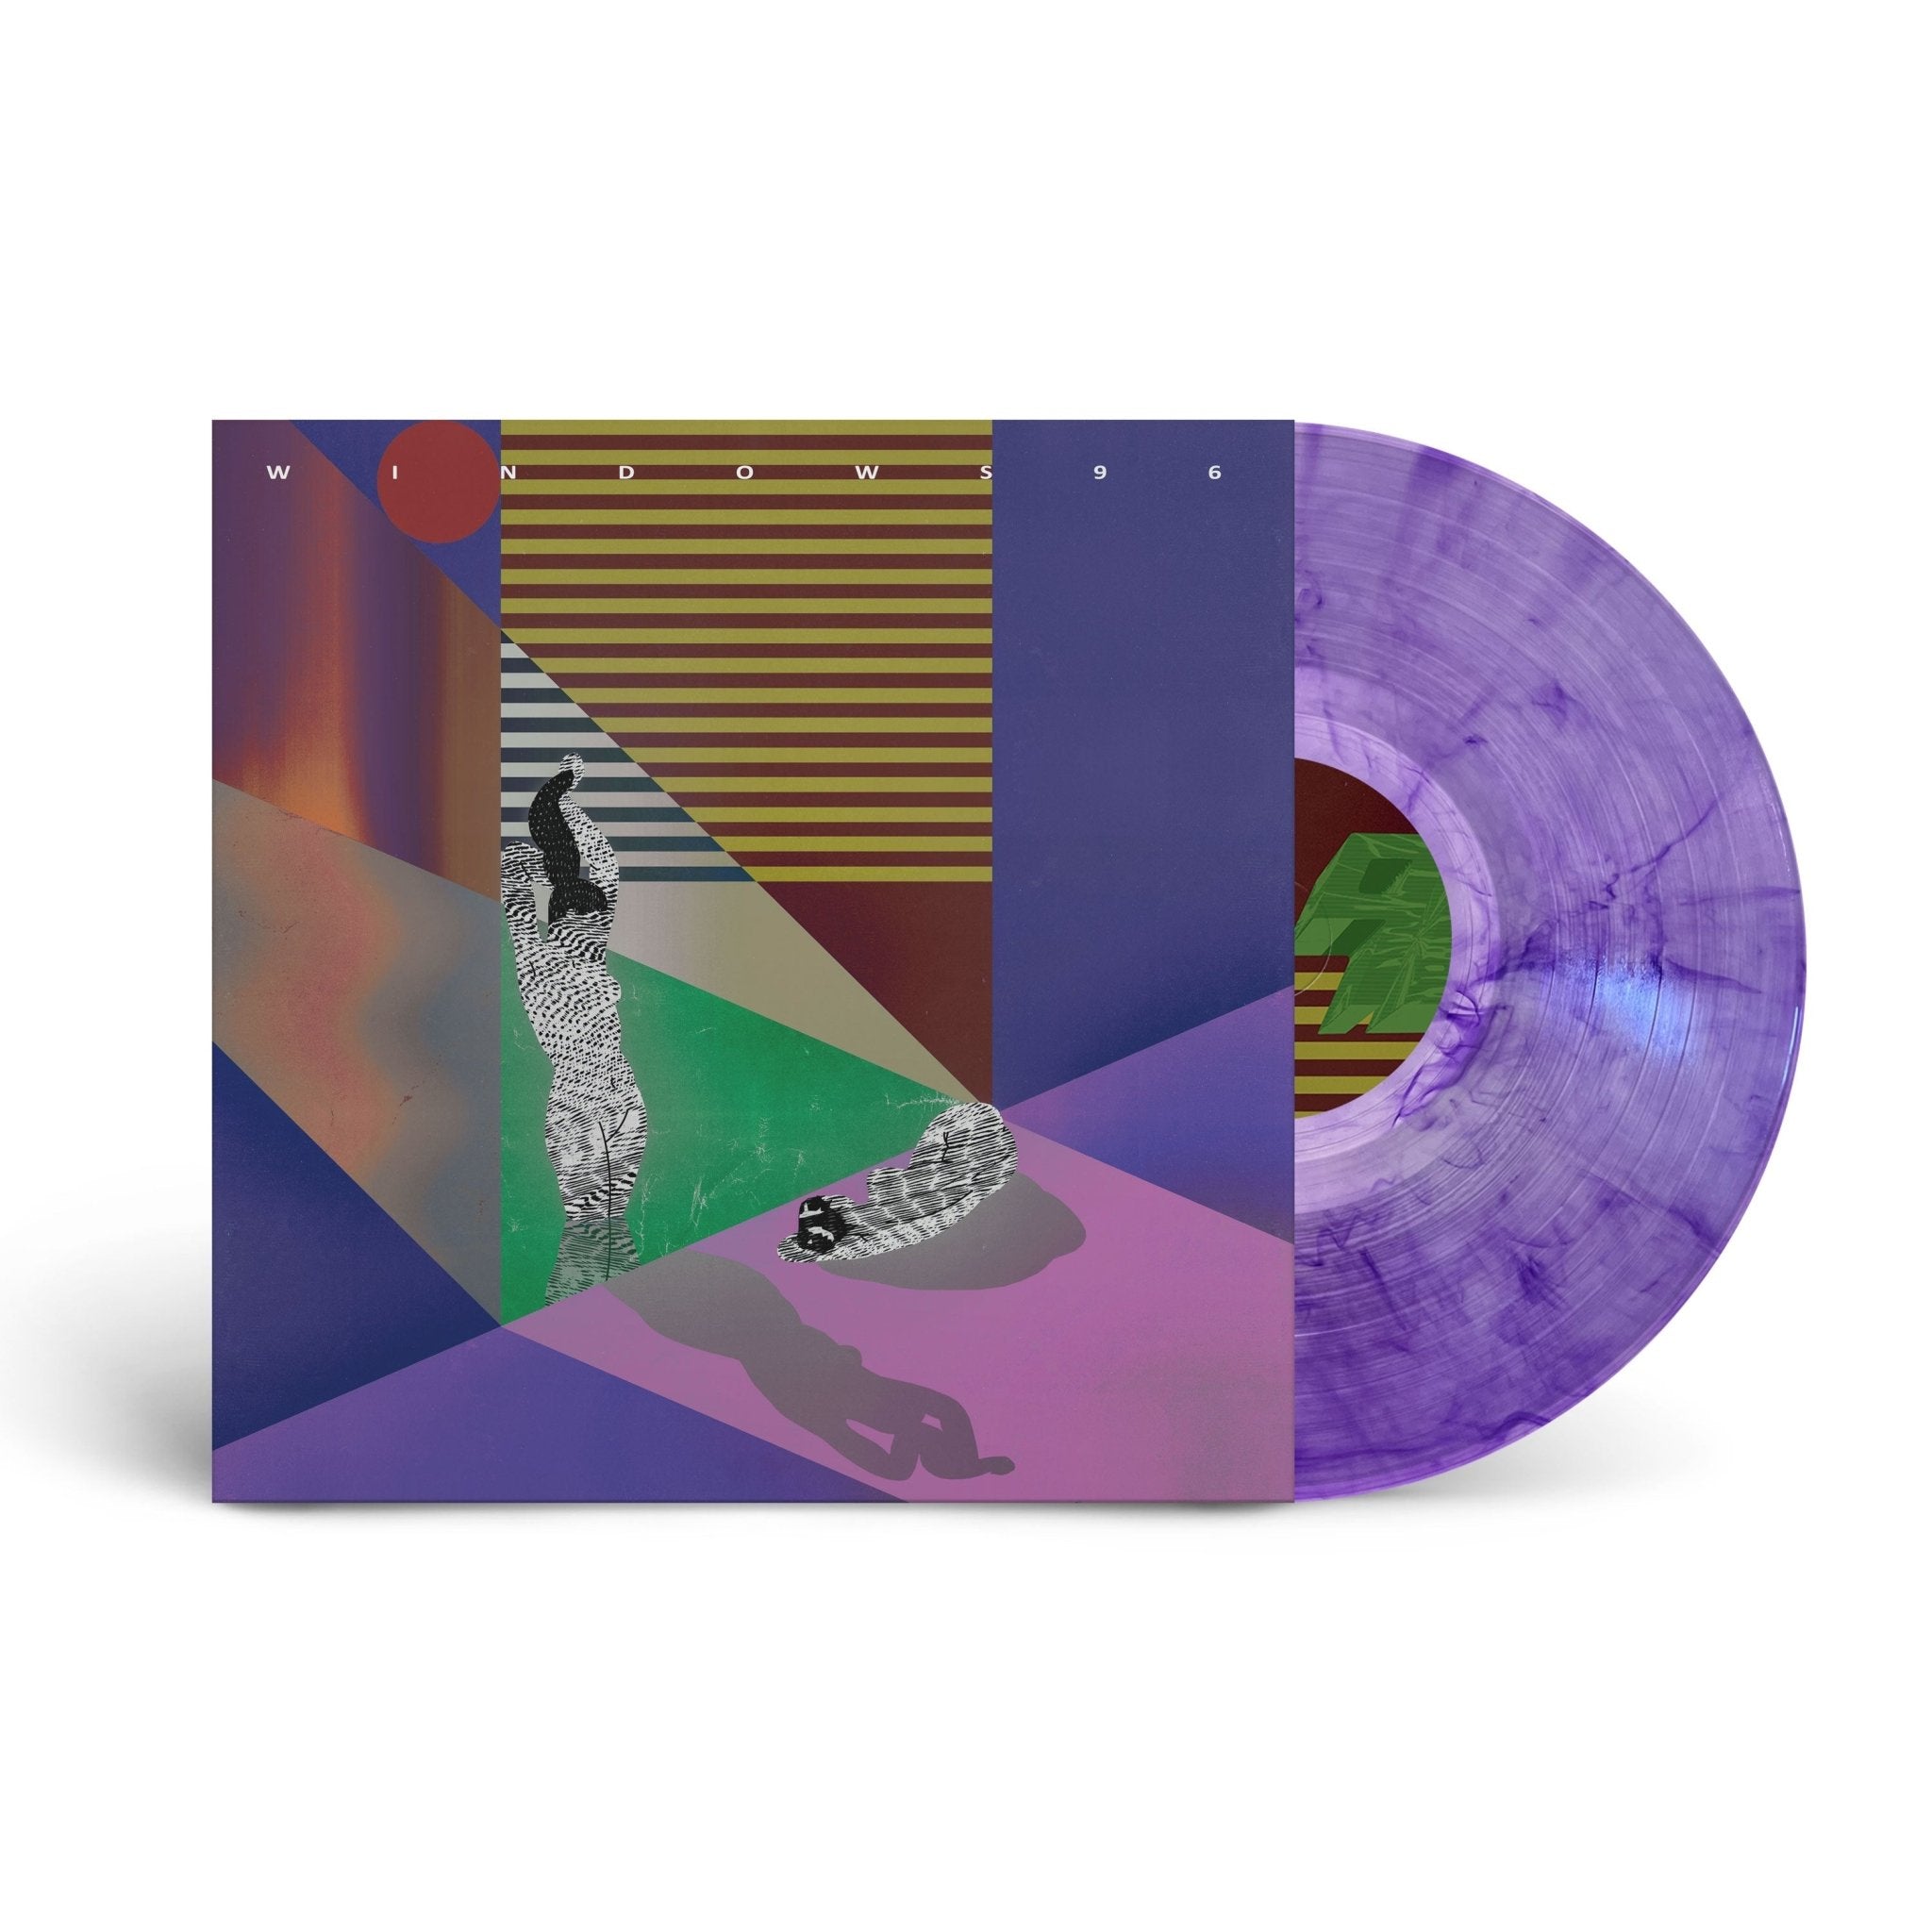 Equip - I Dreamed Of A Palace In The Sky 2xLP (Green + Black Olive